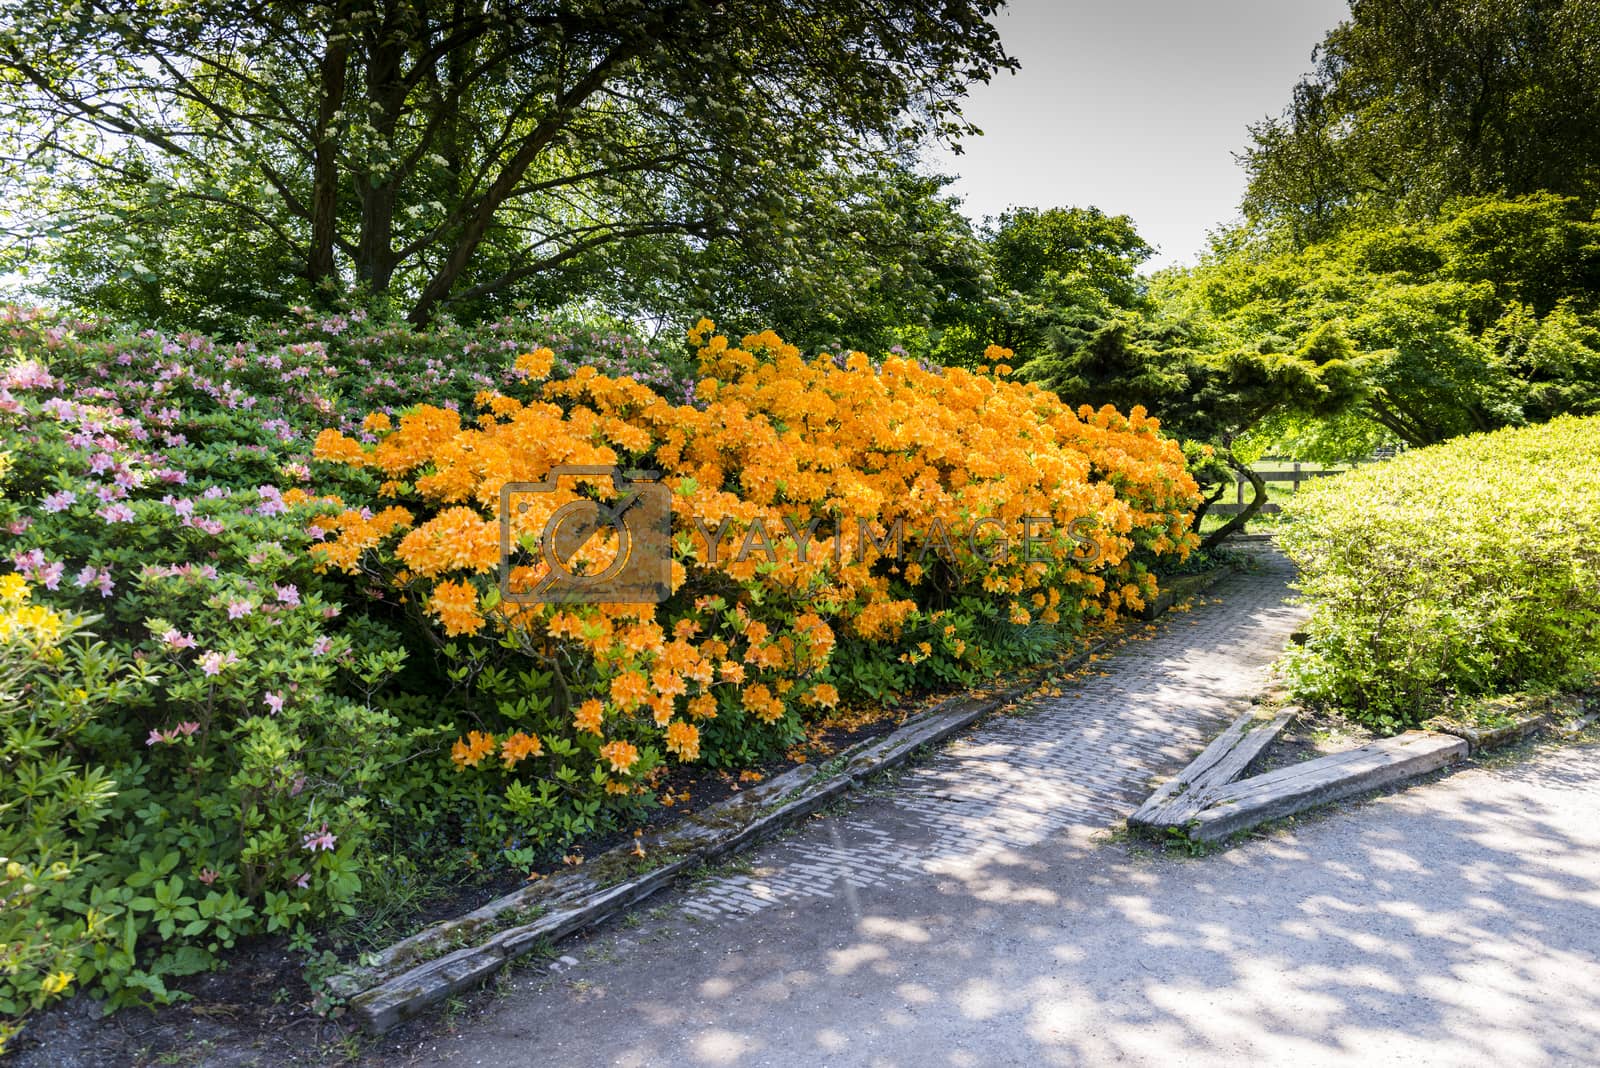 Royalty free image of park clingendael in the hague holland by compuinfoto